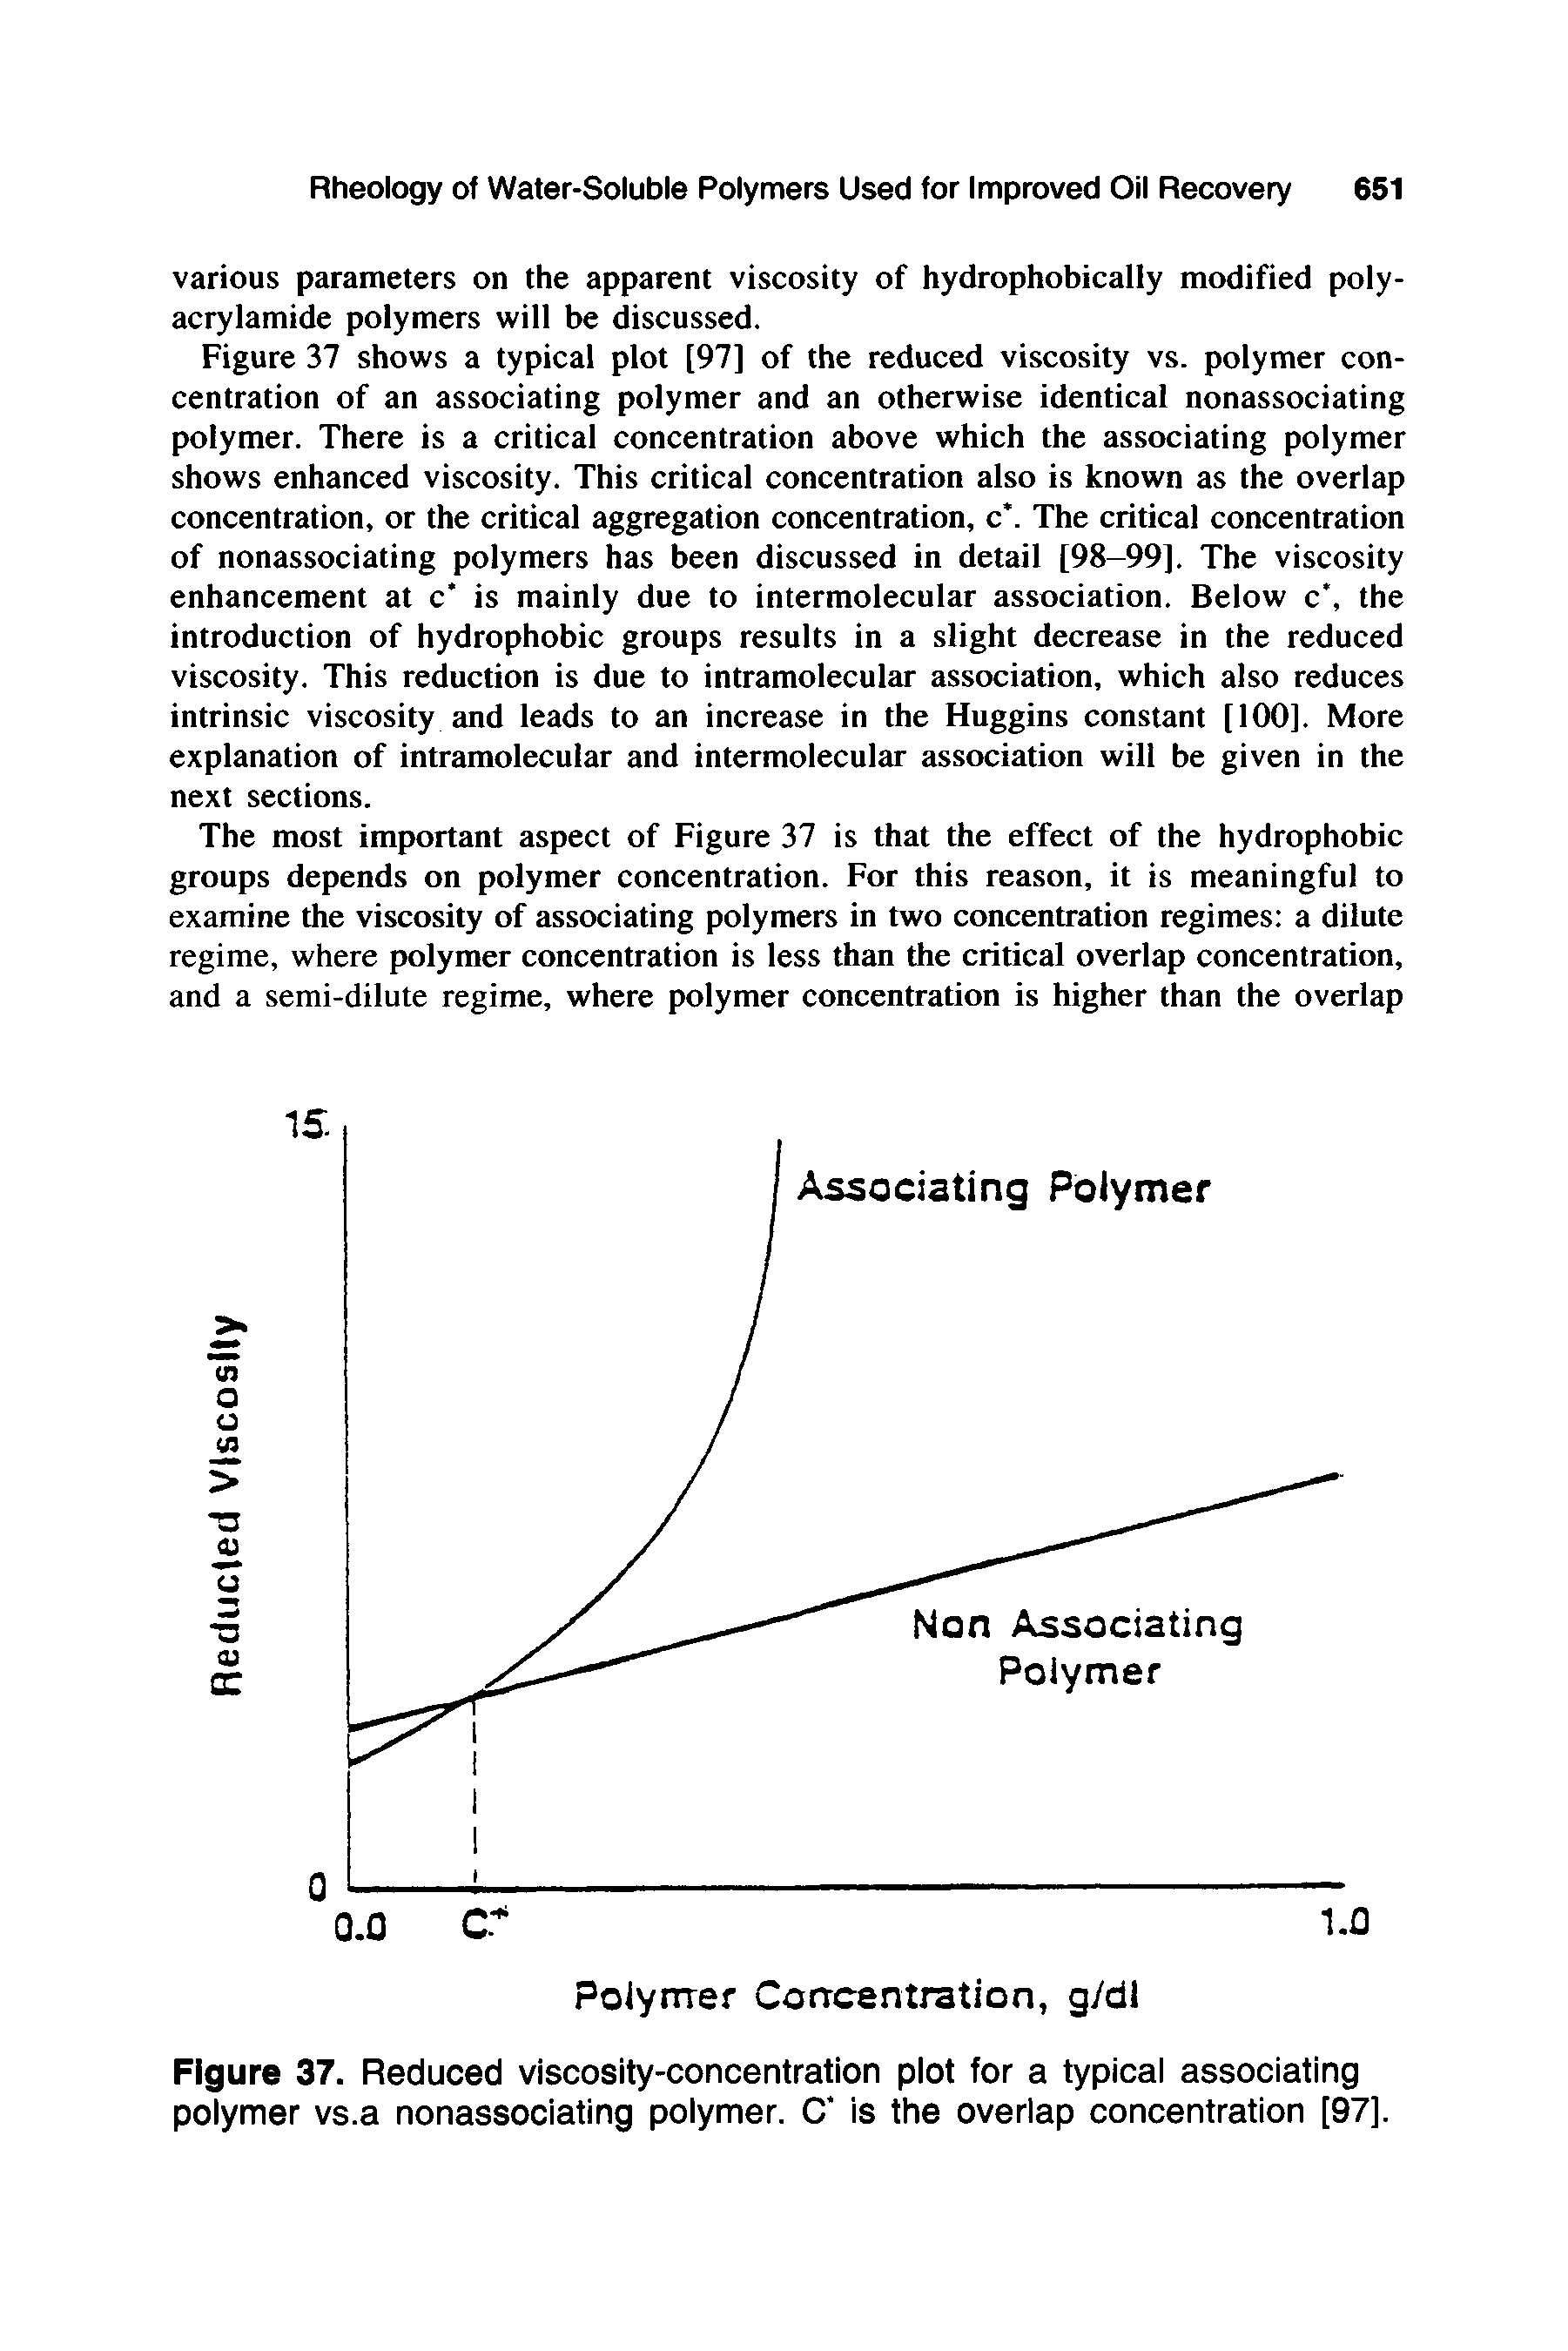 Figure 37. Reduced viscosity-concentration piot for a typical associating polymer vs.a nonassociating polymer. C is the overlap concentration [97].